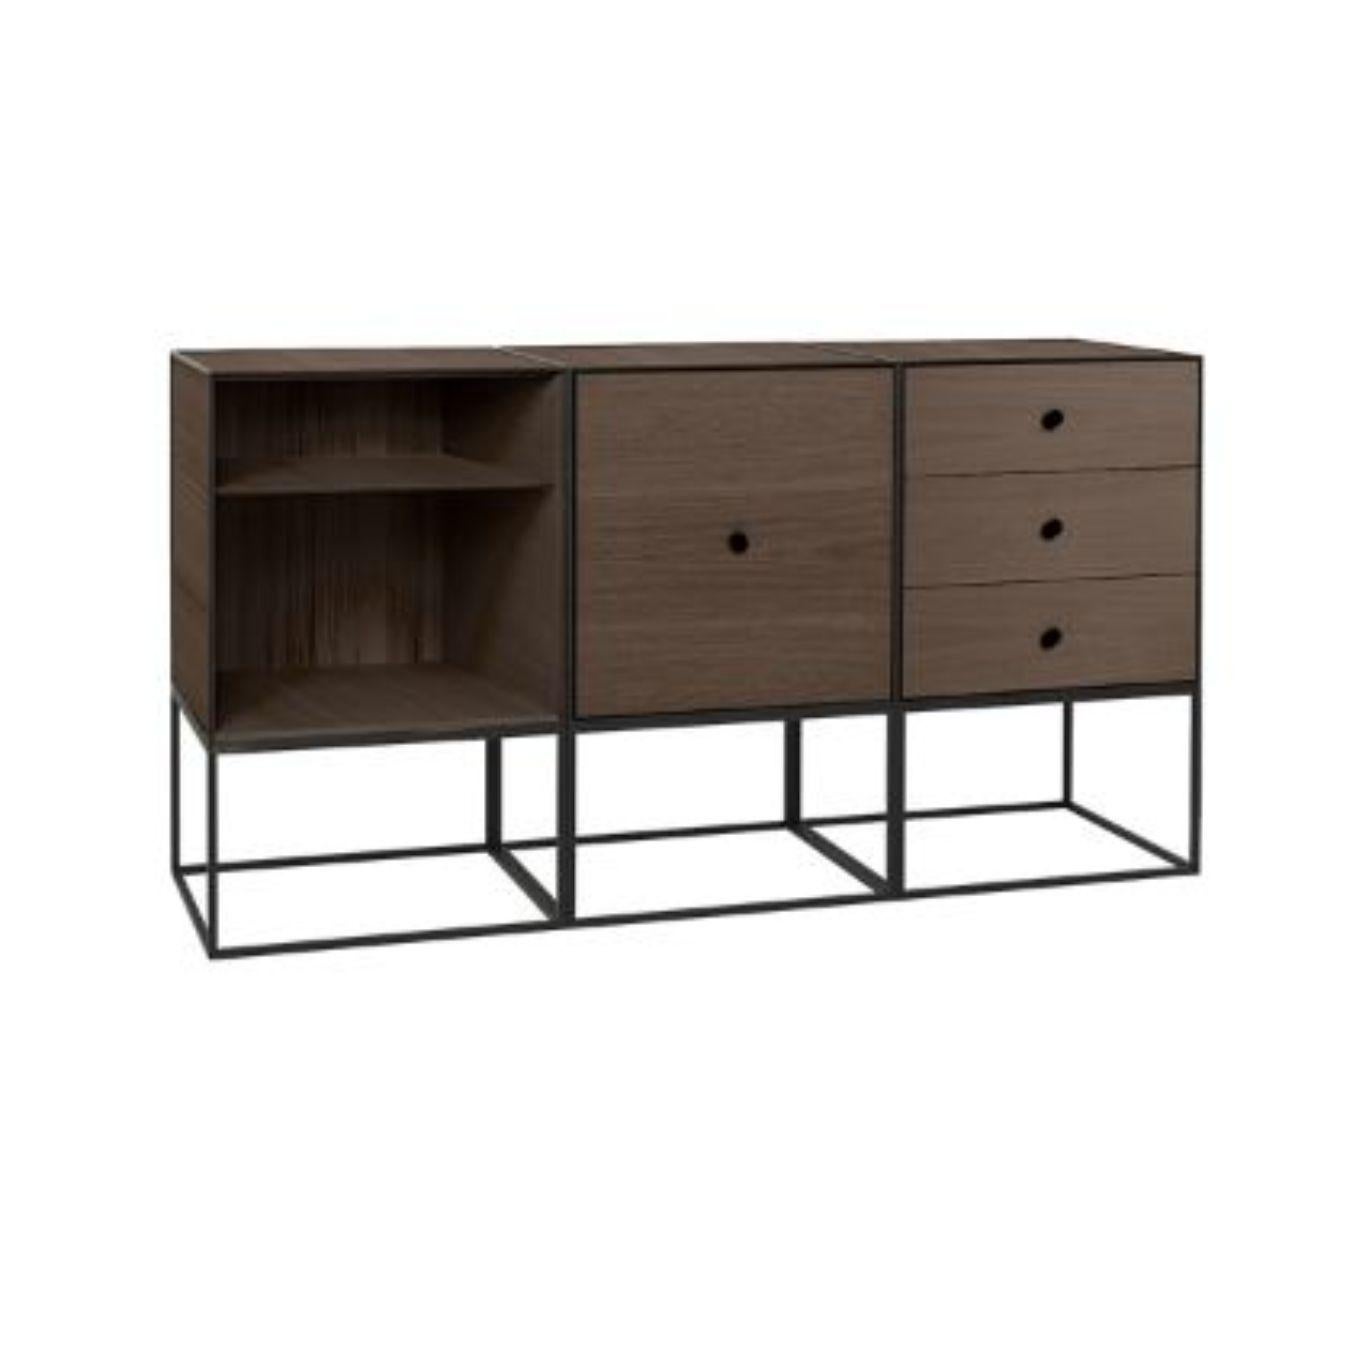 49 Smoked oak frame sideboard trio by Lassen
Dimensions: D 147 x W 42 x H 77 cm 
Materials: finér, melamin, melamine, metal, veneer, oak
Also available in different colours and dimensions.
Weight: 88 Kg

By Lassen is a Danish design brand